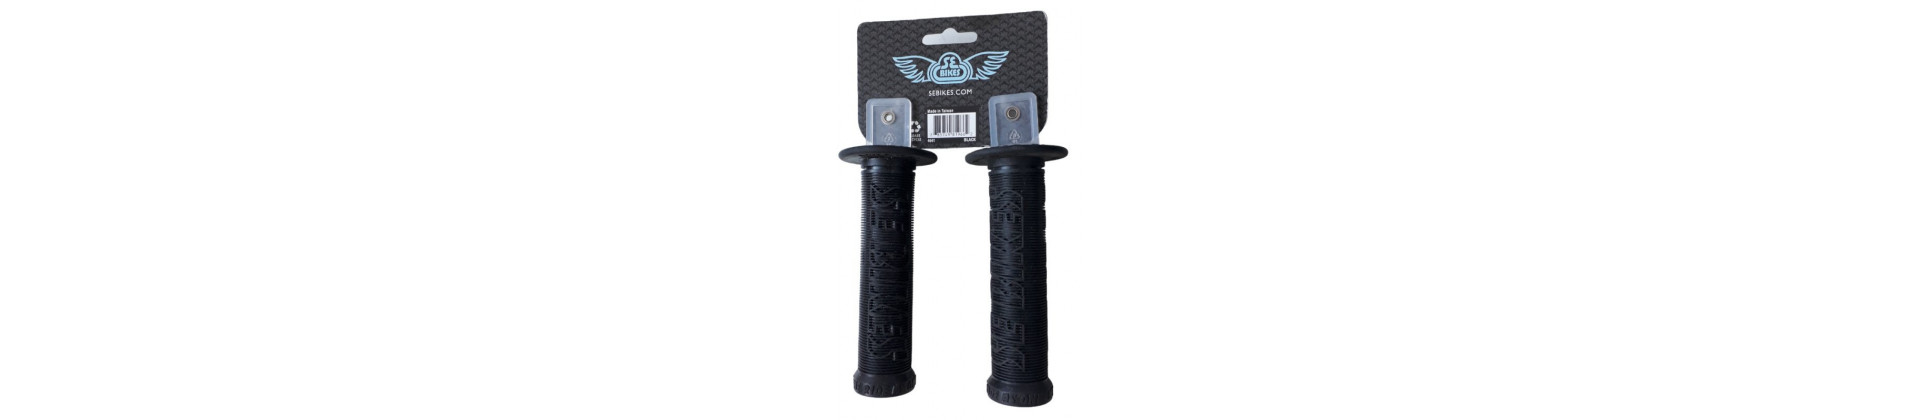 Fixie grips and handlebar tapes